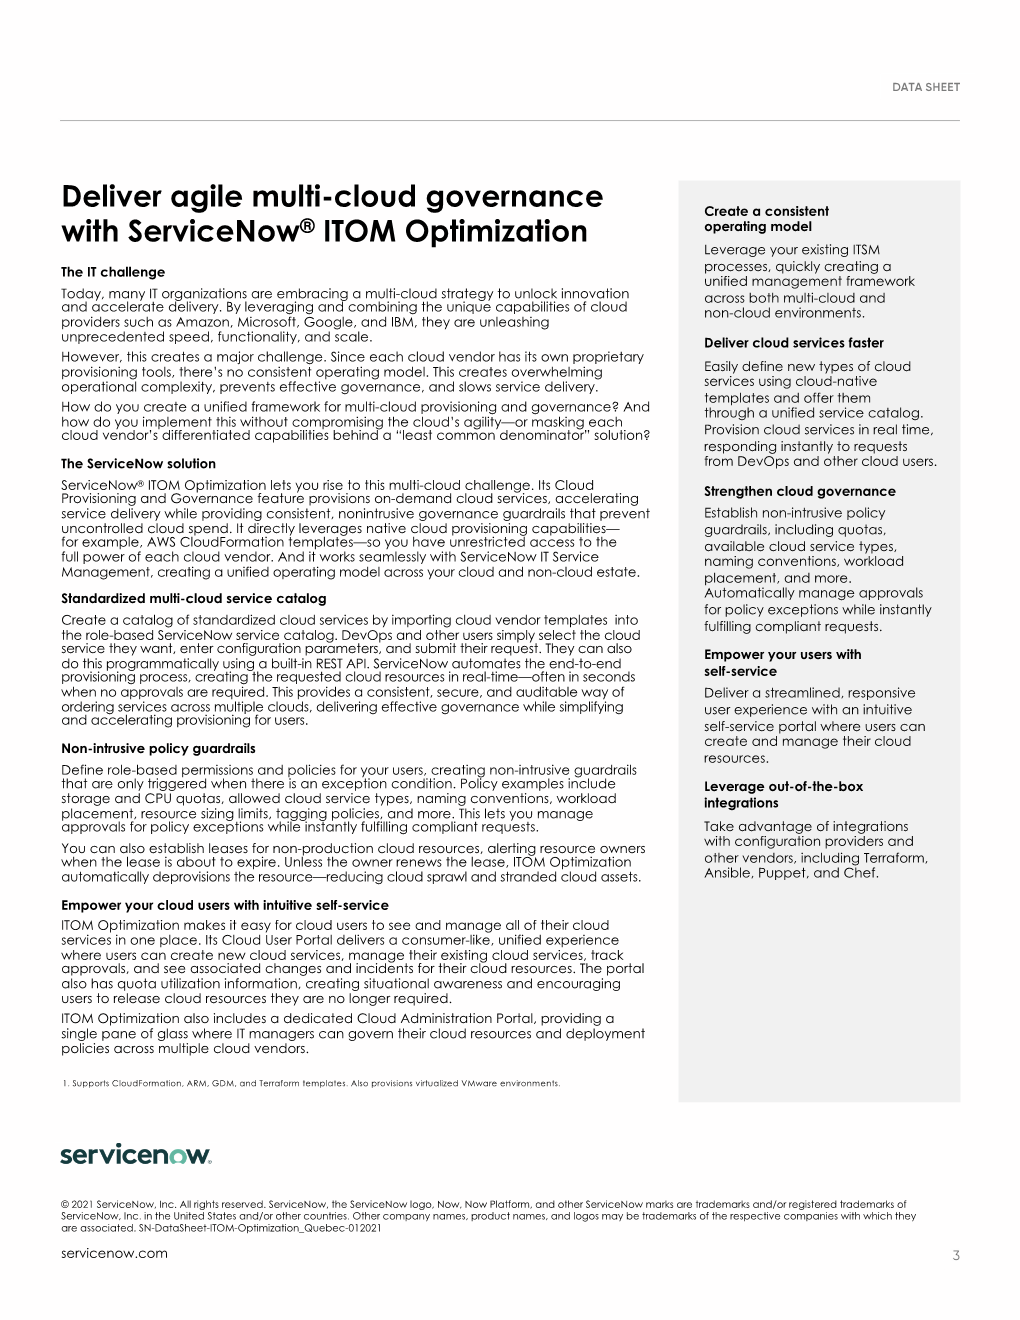 Drive Down Cloud Costs with Servicenow ITOM Optimization